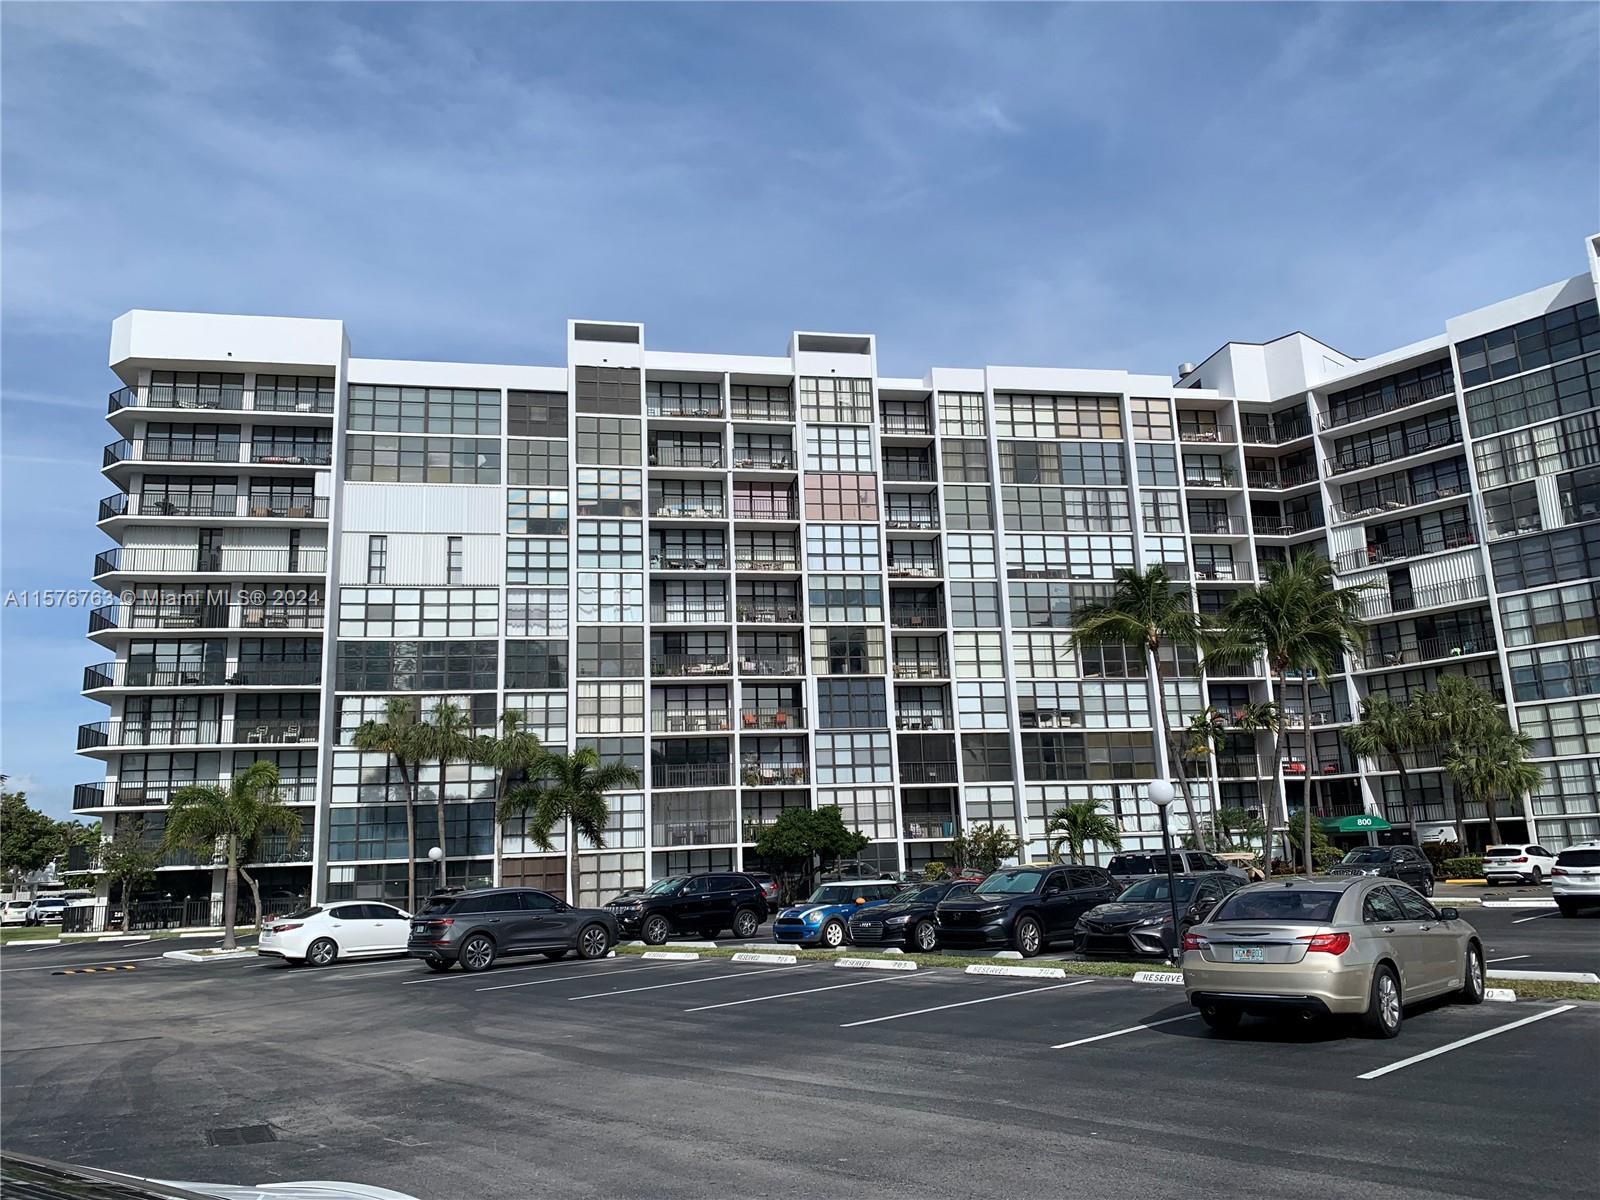 Photo of 800 Parkview Dr #622 in Hallandale Beach, FL